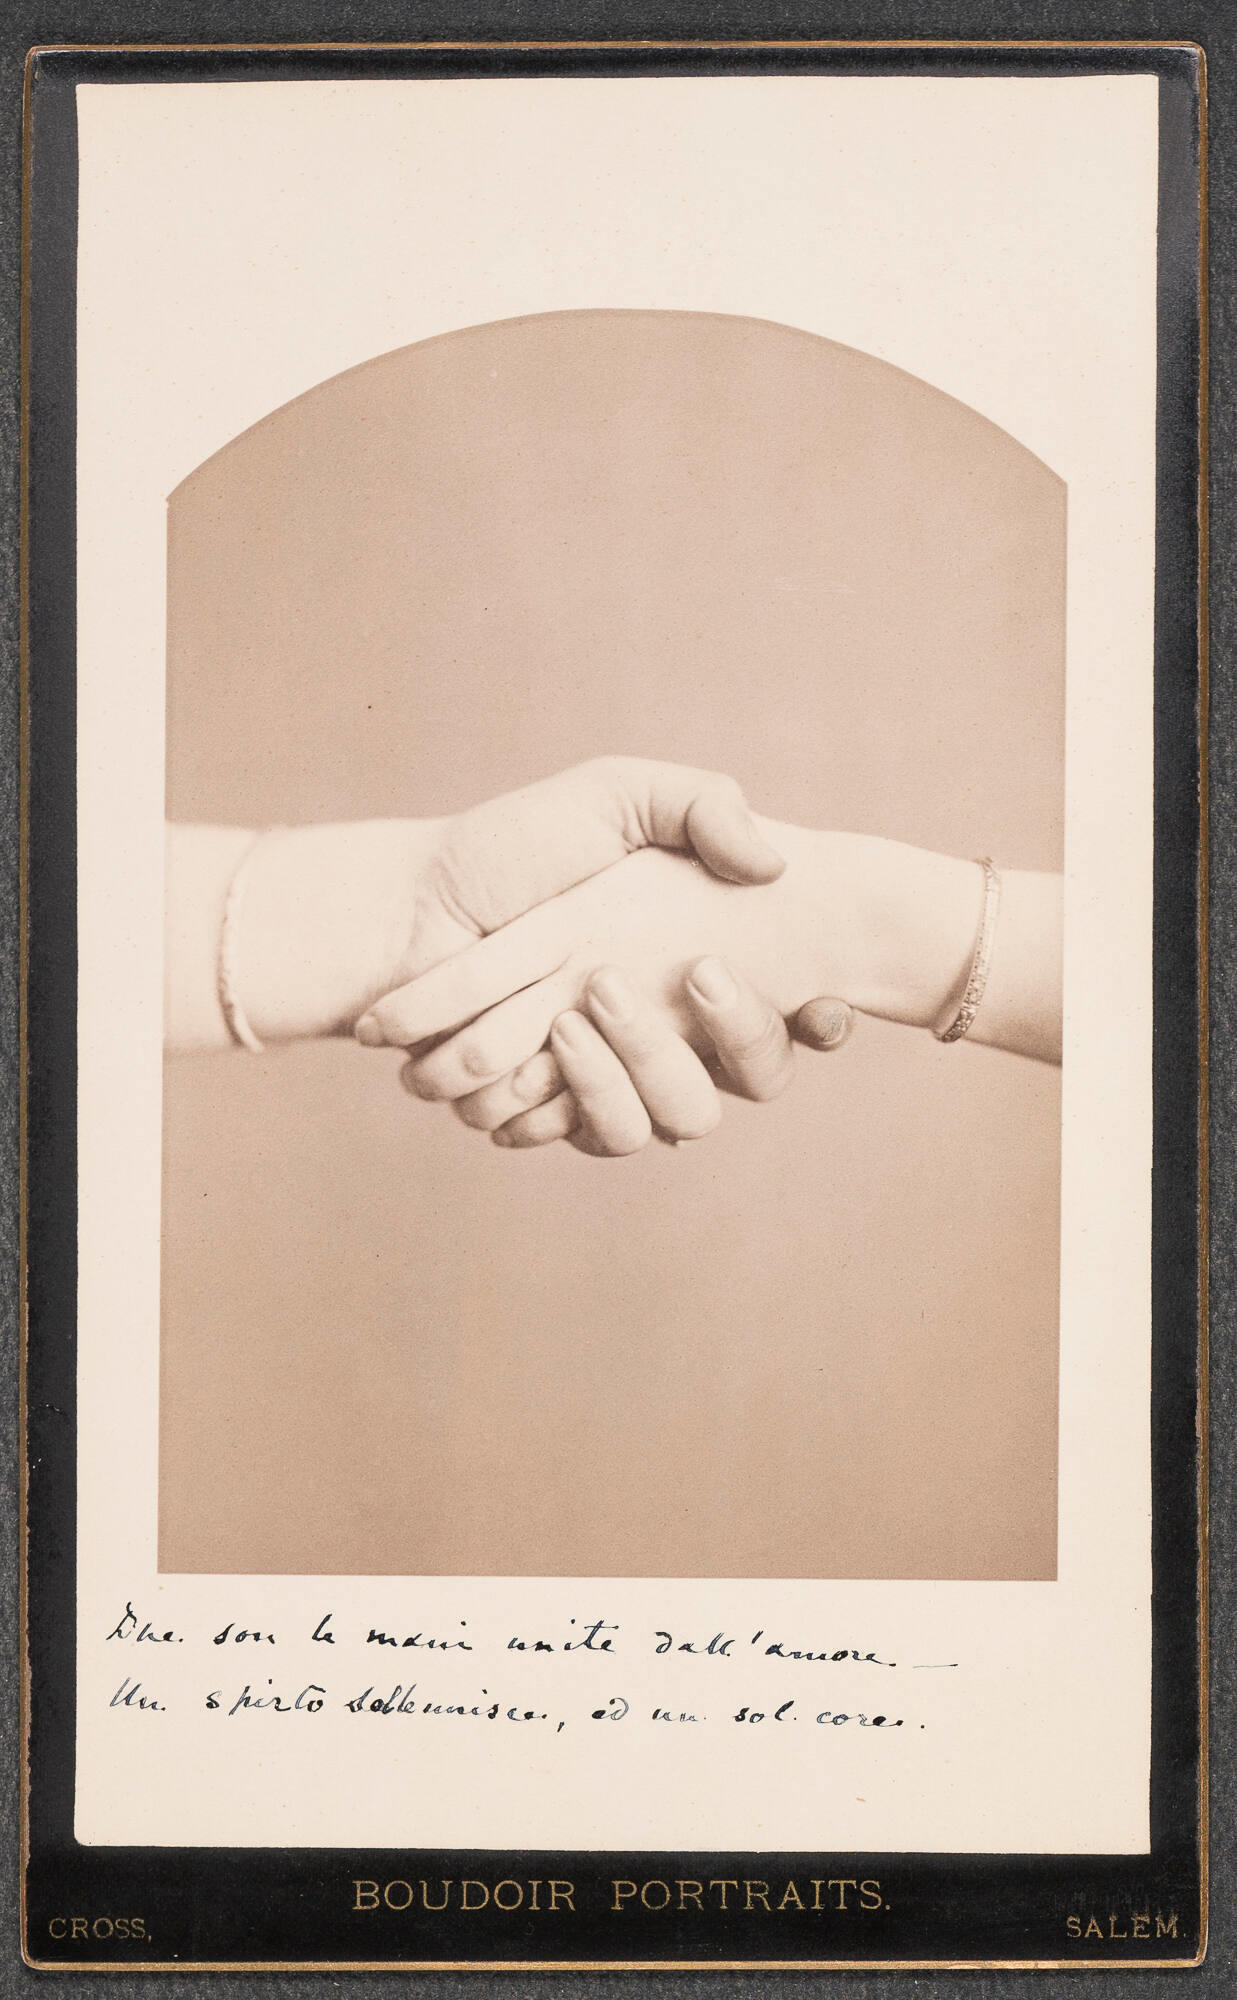 A photograph of two clasped light skinned hands of Crawford & Gardner. Inscribed in latin beneath the photograph is Two are the hands united in love, one spirit united and a single heart.